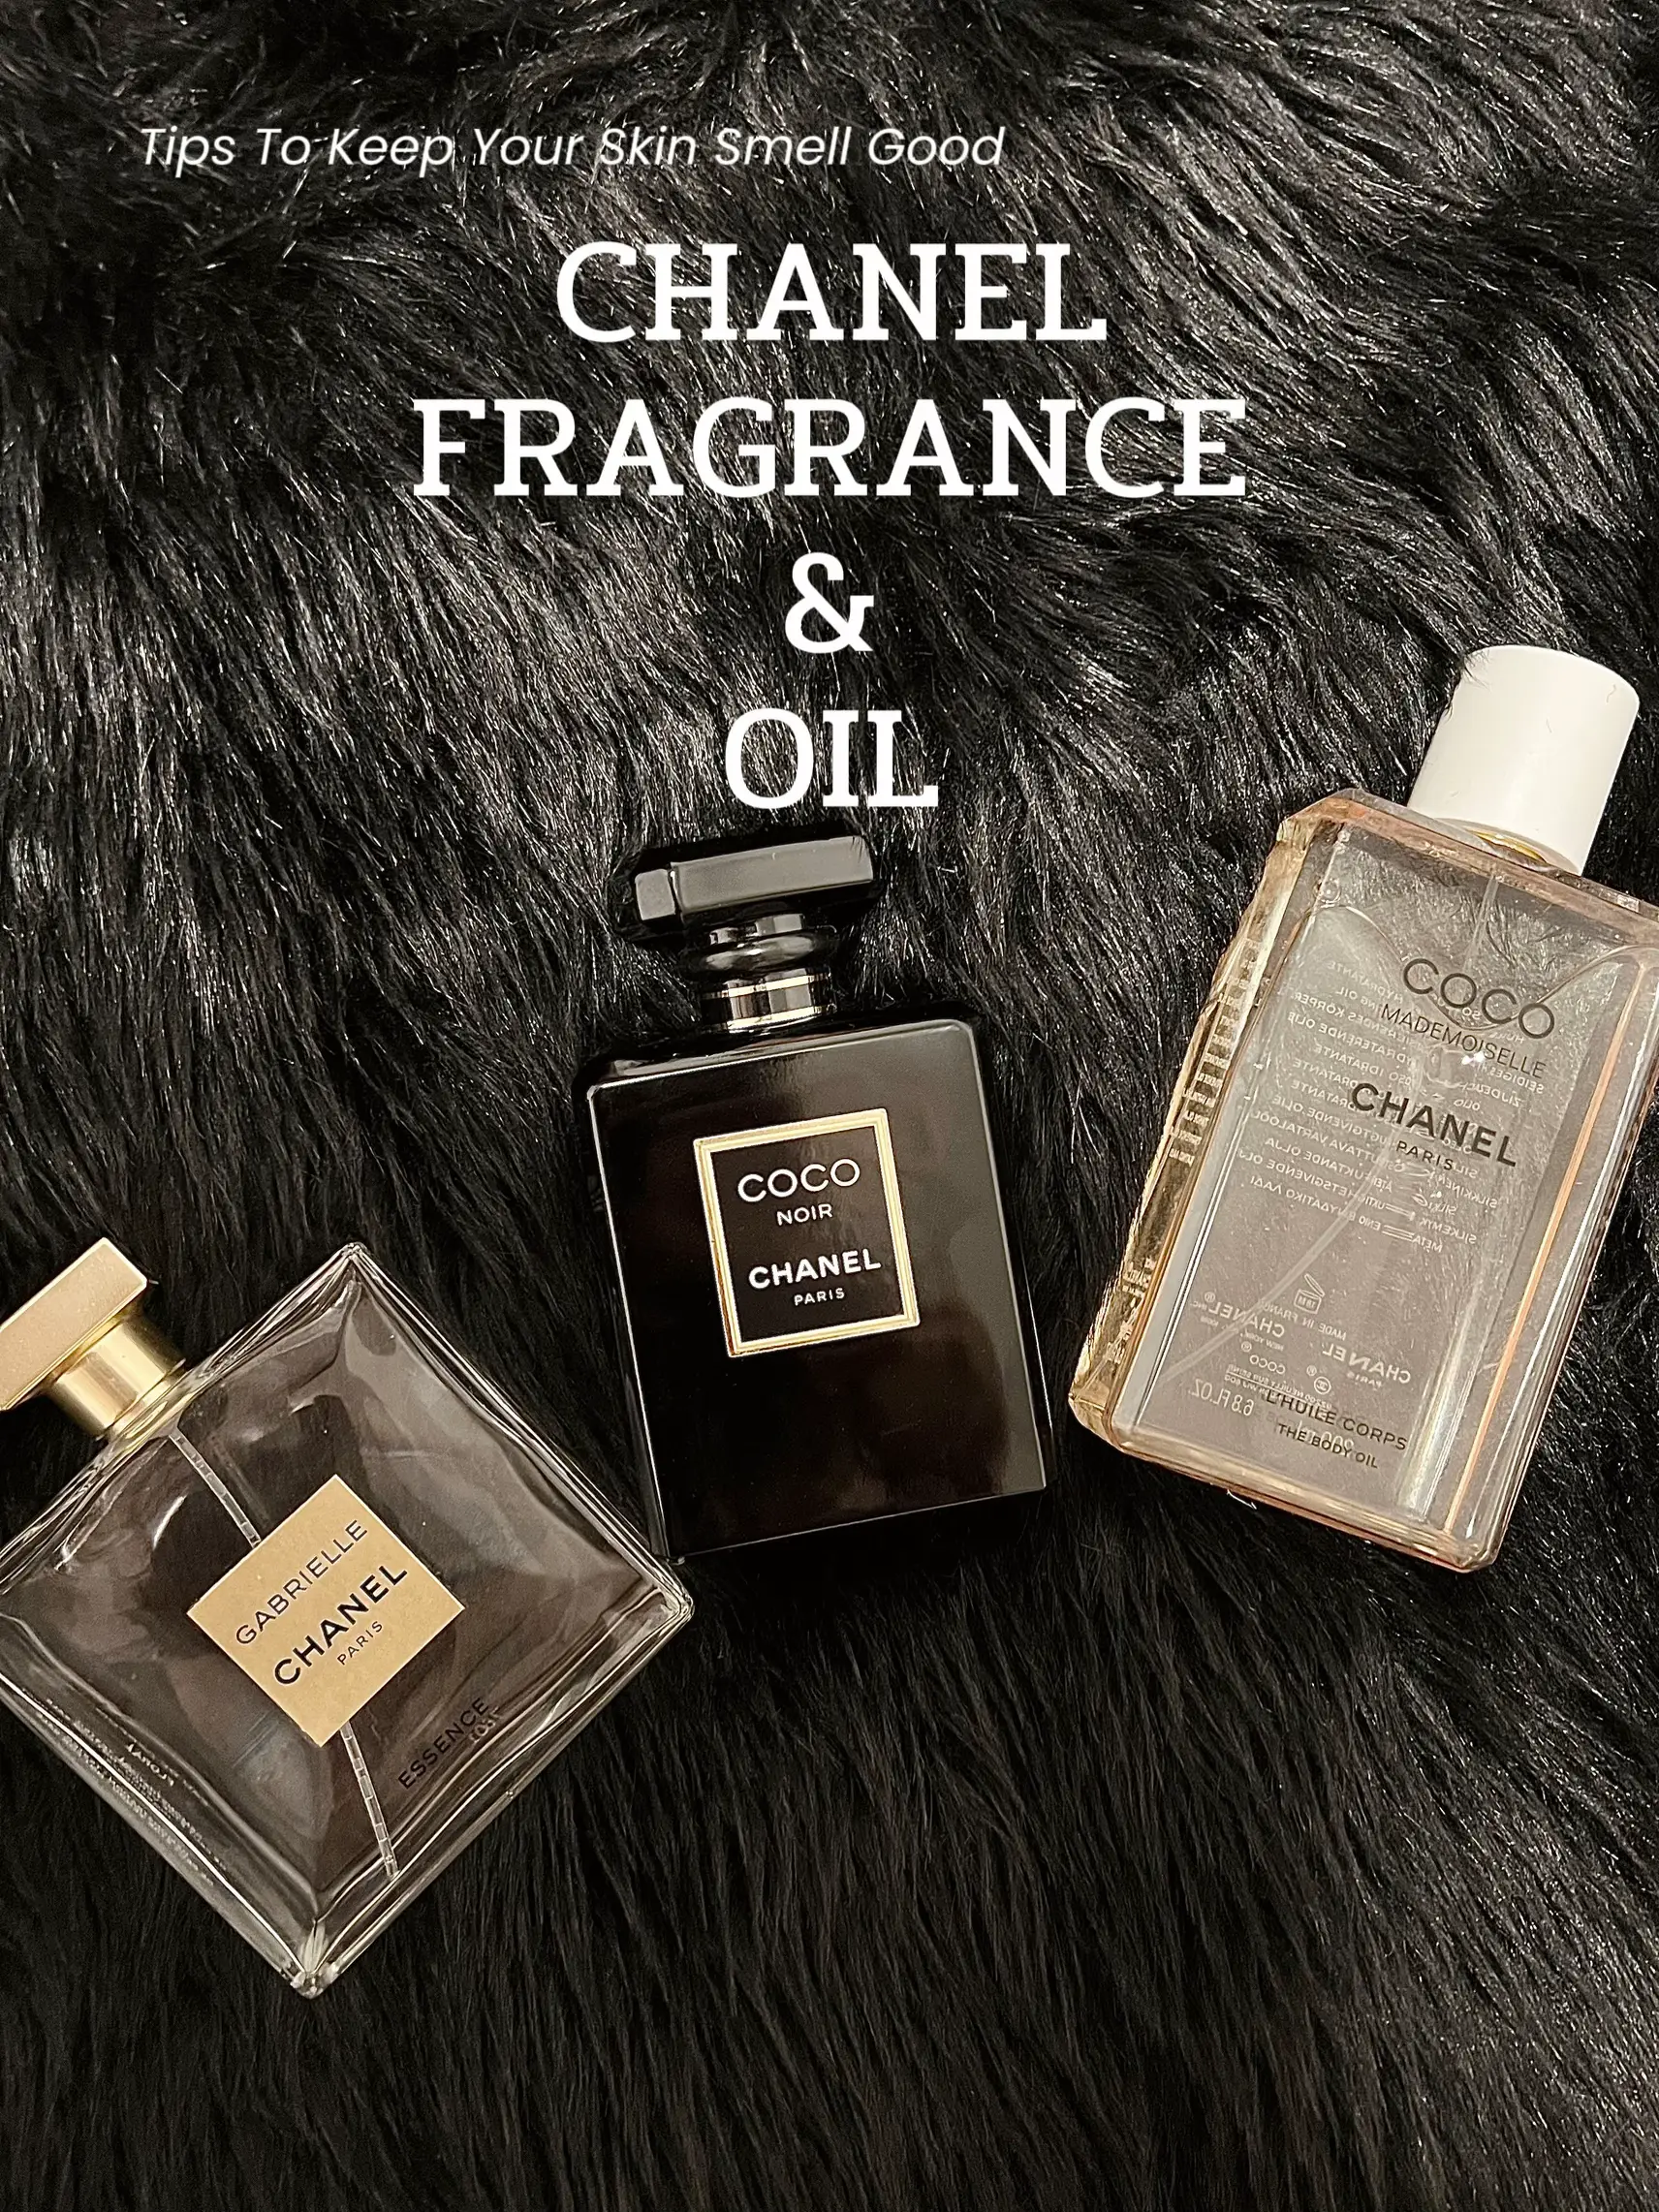 CHANEL Parisian Gentry Style Perfume and Oil, Gallery posted by JANNLEK